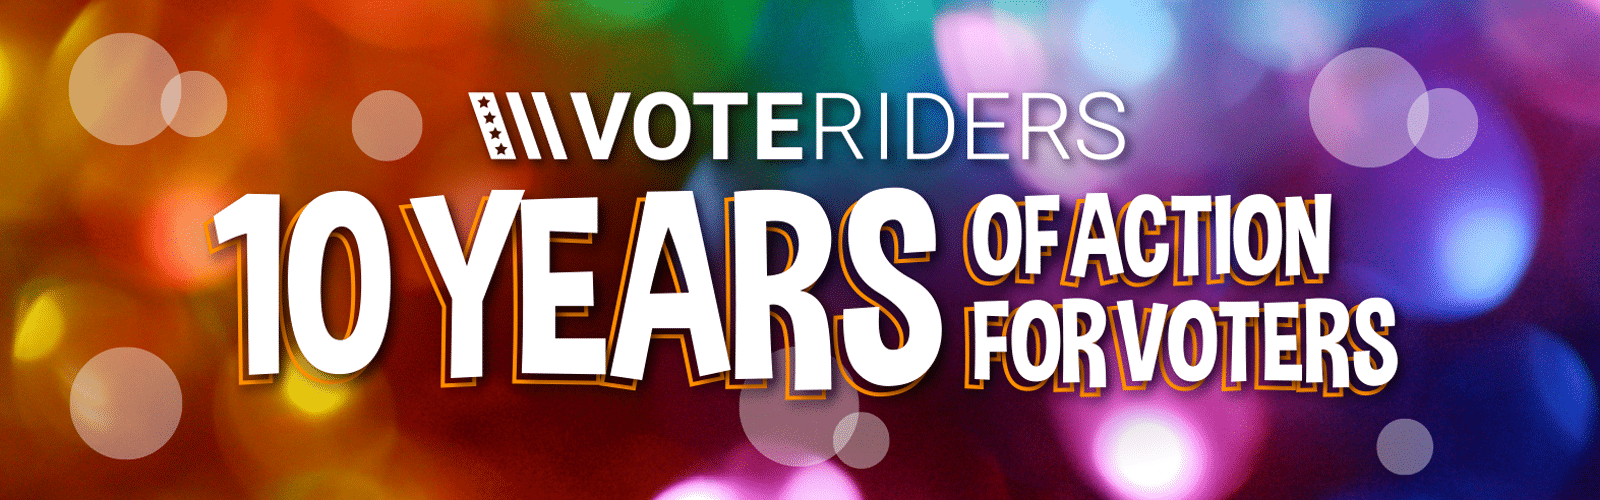 VoteRiders: 10 Years of Action for Voters